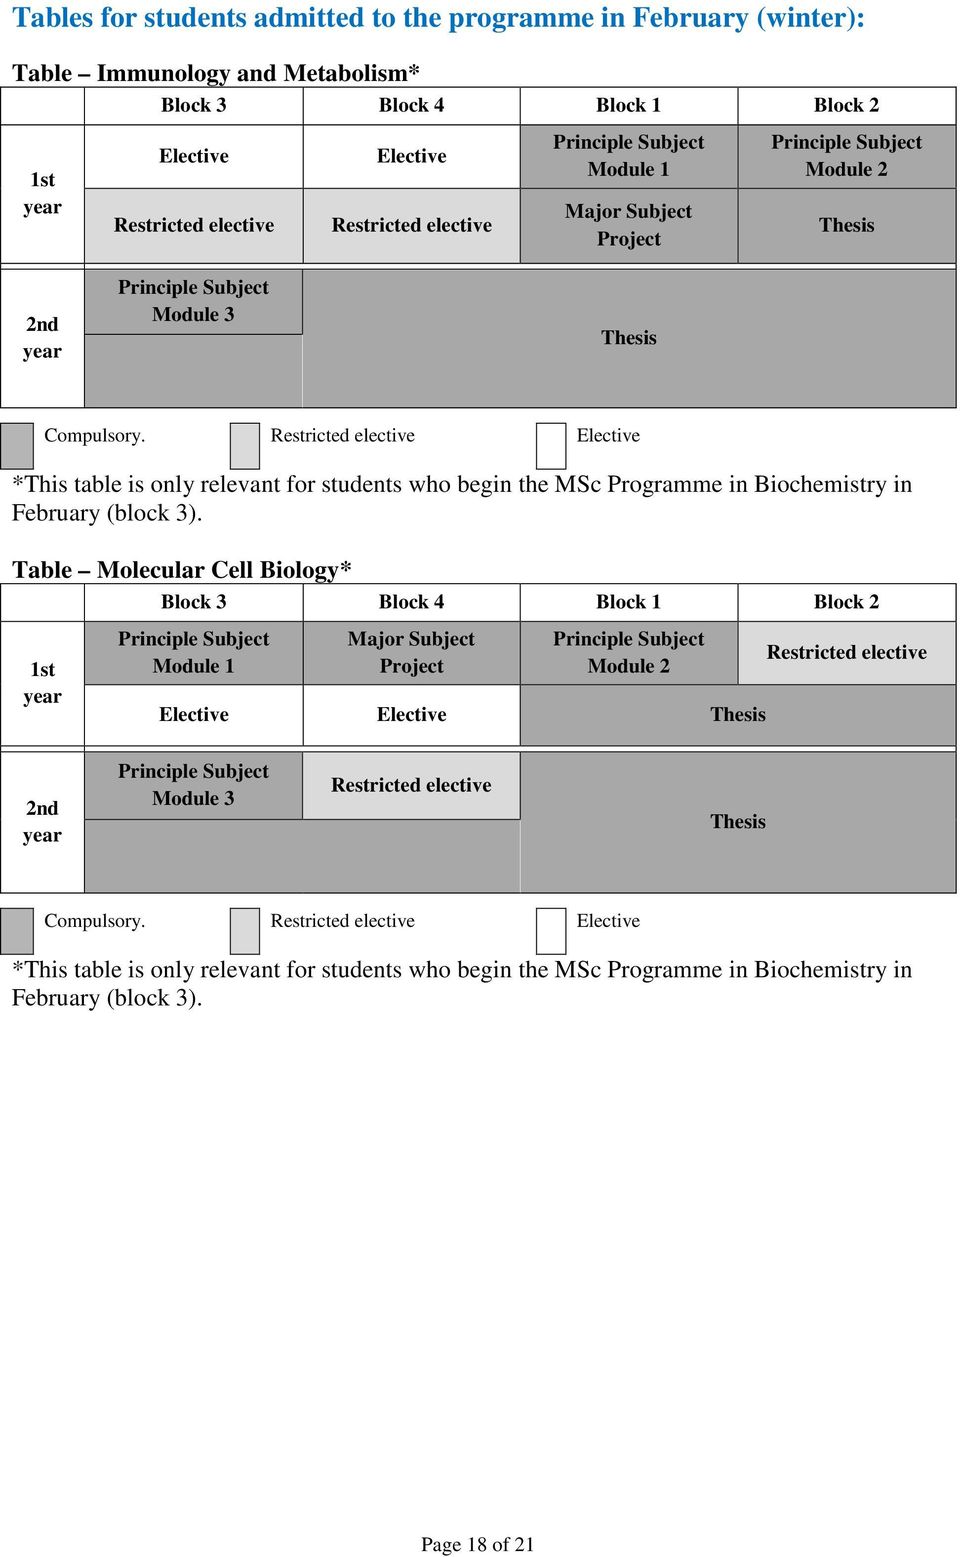 *This table is only relevant for students who begin the MSc Programme in Biochemistry in February (block 3).